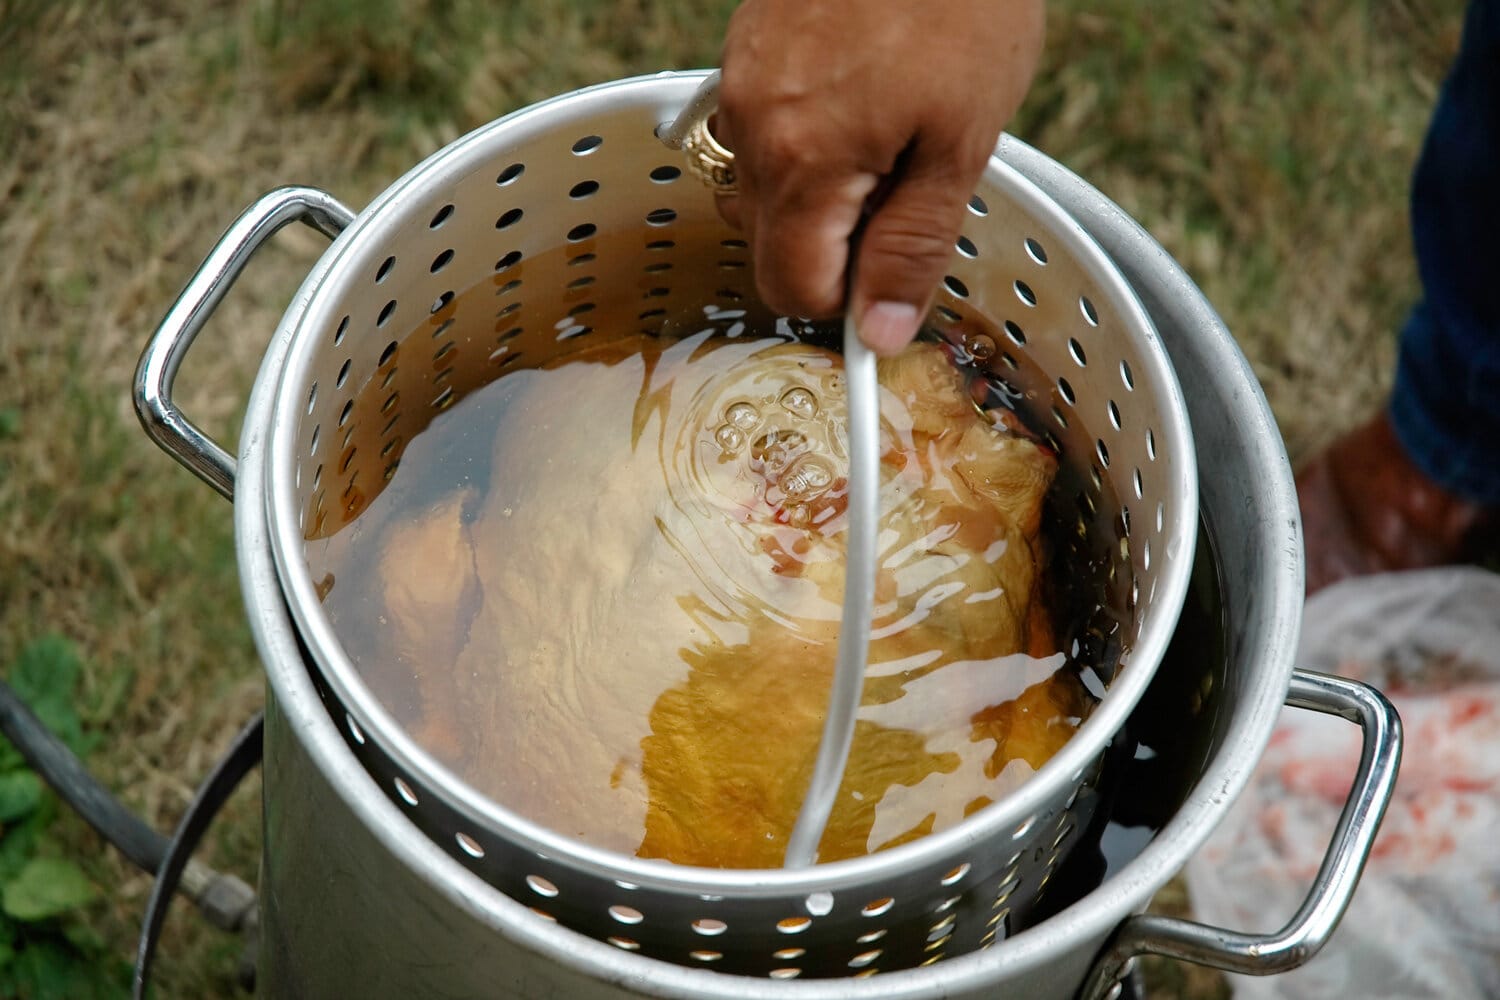 A turkey slowly gets lowered into a large pot of hot peanut oil for frying.